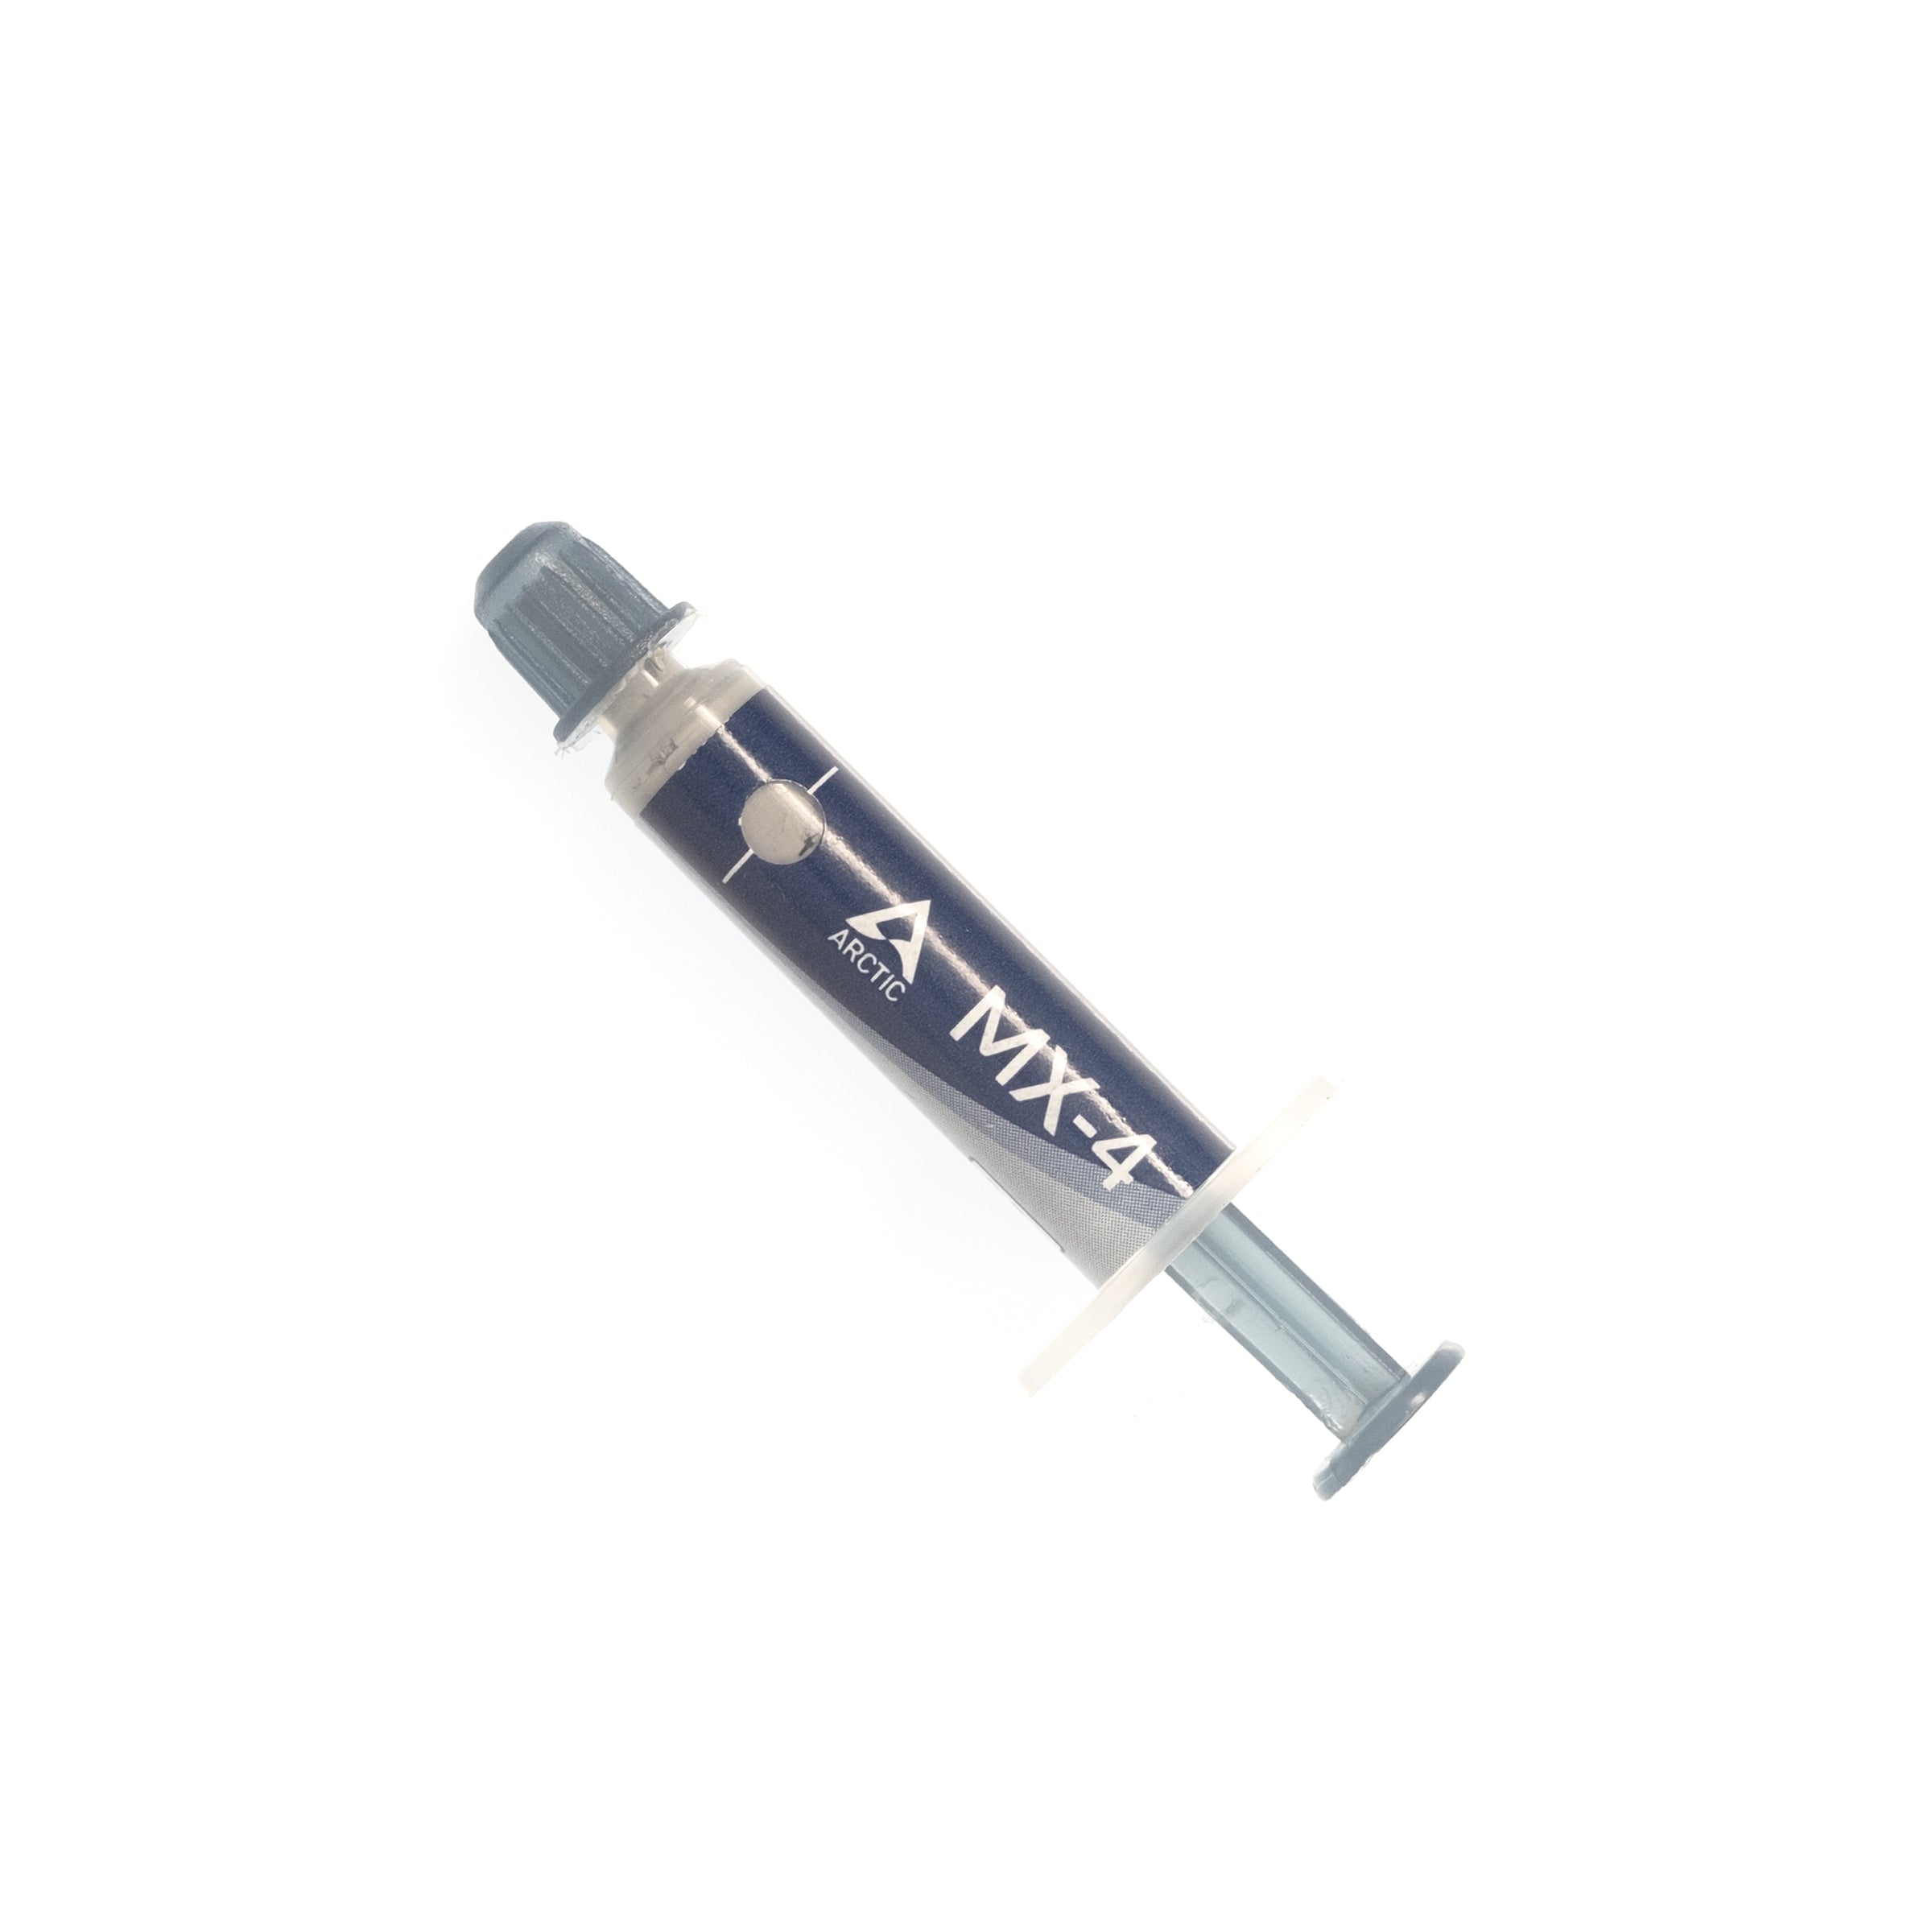 Arctic MX-4 Carbon Based Thermal Compound Paste 4g for sale online